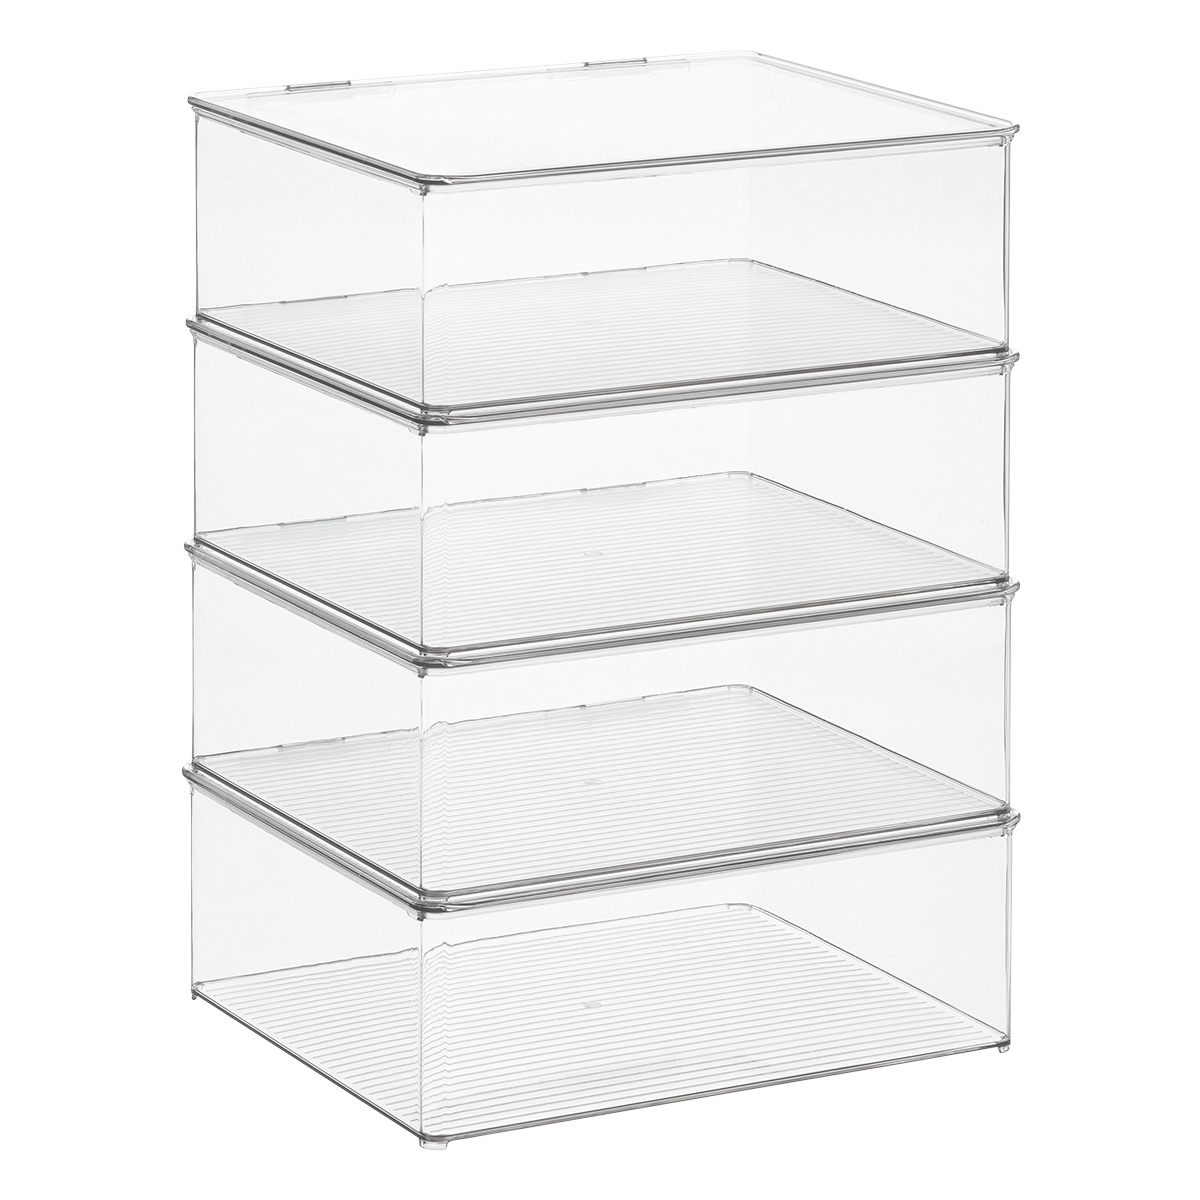 https://www.containerstore.com/catalogimages/477945/10092638-idesign-4-case-hinged-lid-s.jpg